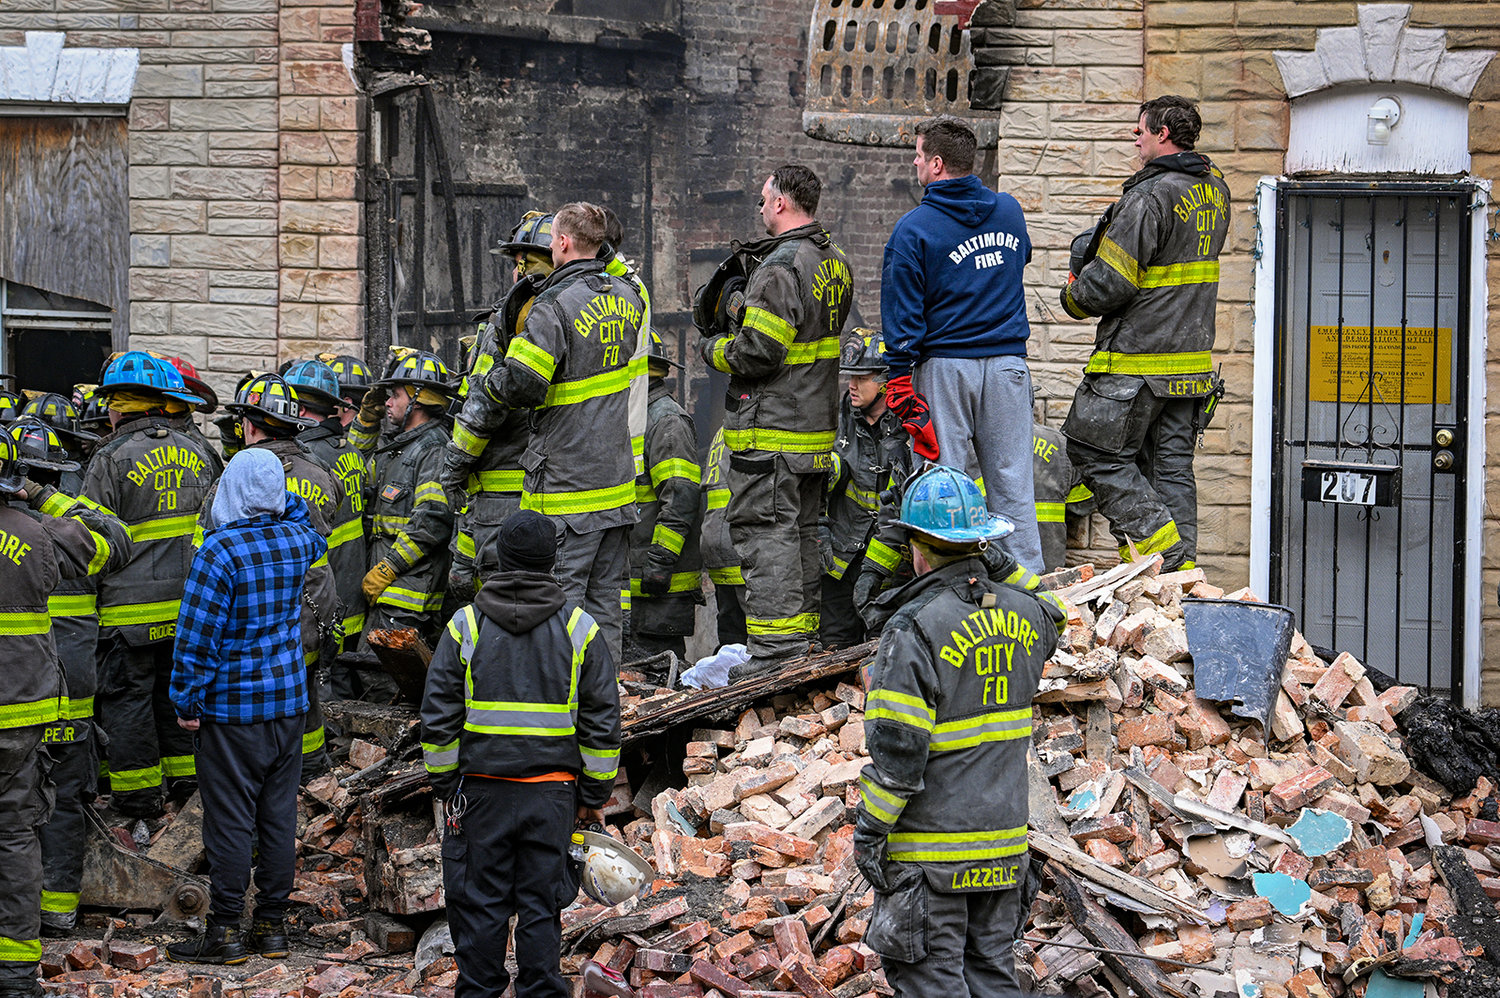 Baltimore City firefighters watch as the body of Lt. Paul Butrim is taken from the scene of a vacant row house fire on S. Stricker Street. Three firefighters died when they were trapped in a collapse while fighting the fire on Jan. 24. (Jerry Jackson/Baltimore Sun/TNS)